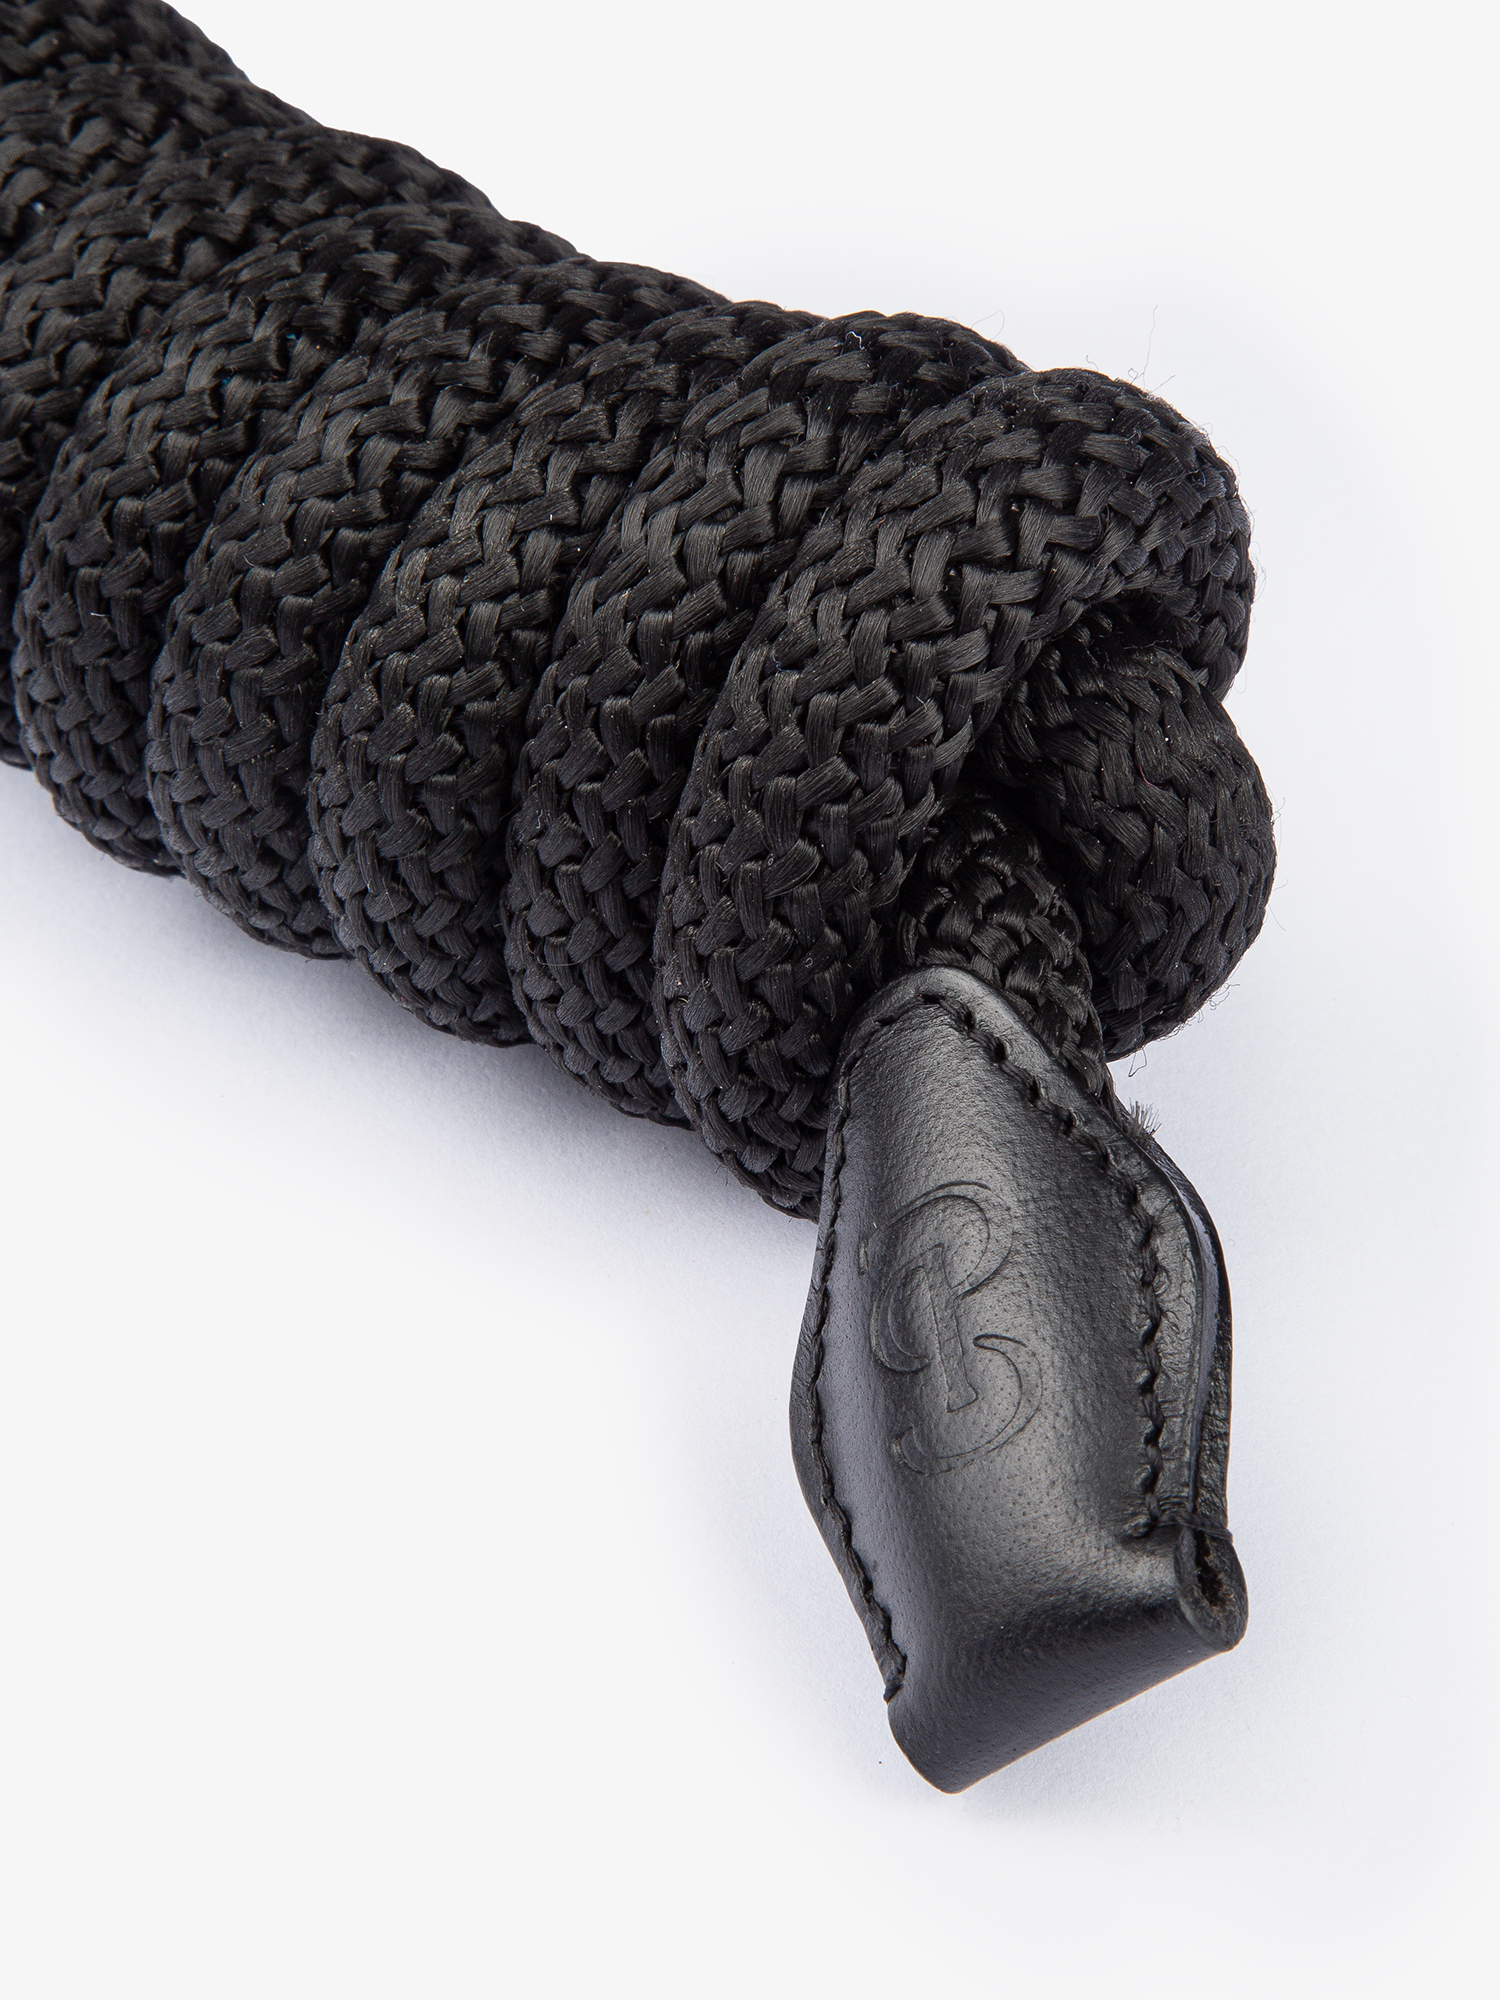 PS Lead Rope Black • PS of Sweden | PS Official Webshop